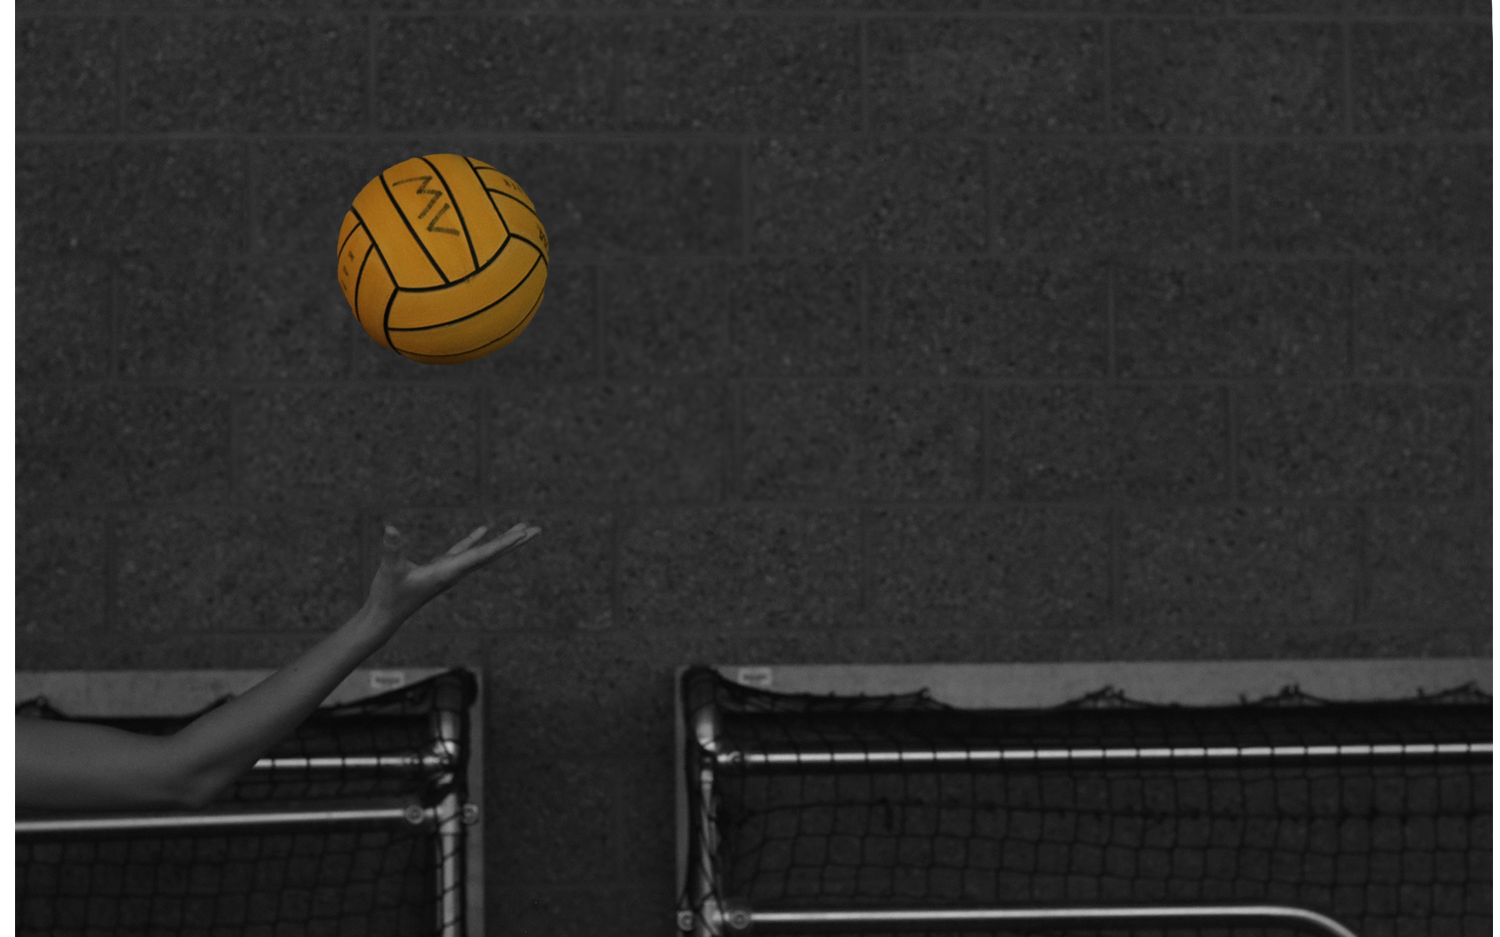 On the left side of the photo there is an arm and above the arm in the air there is a waterpolo ball. The entire image is in black and white except for the ball which is a vibrant yellow.